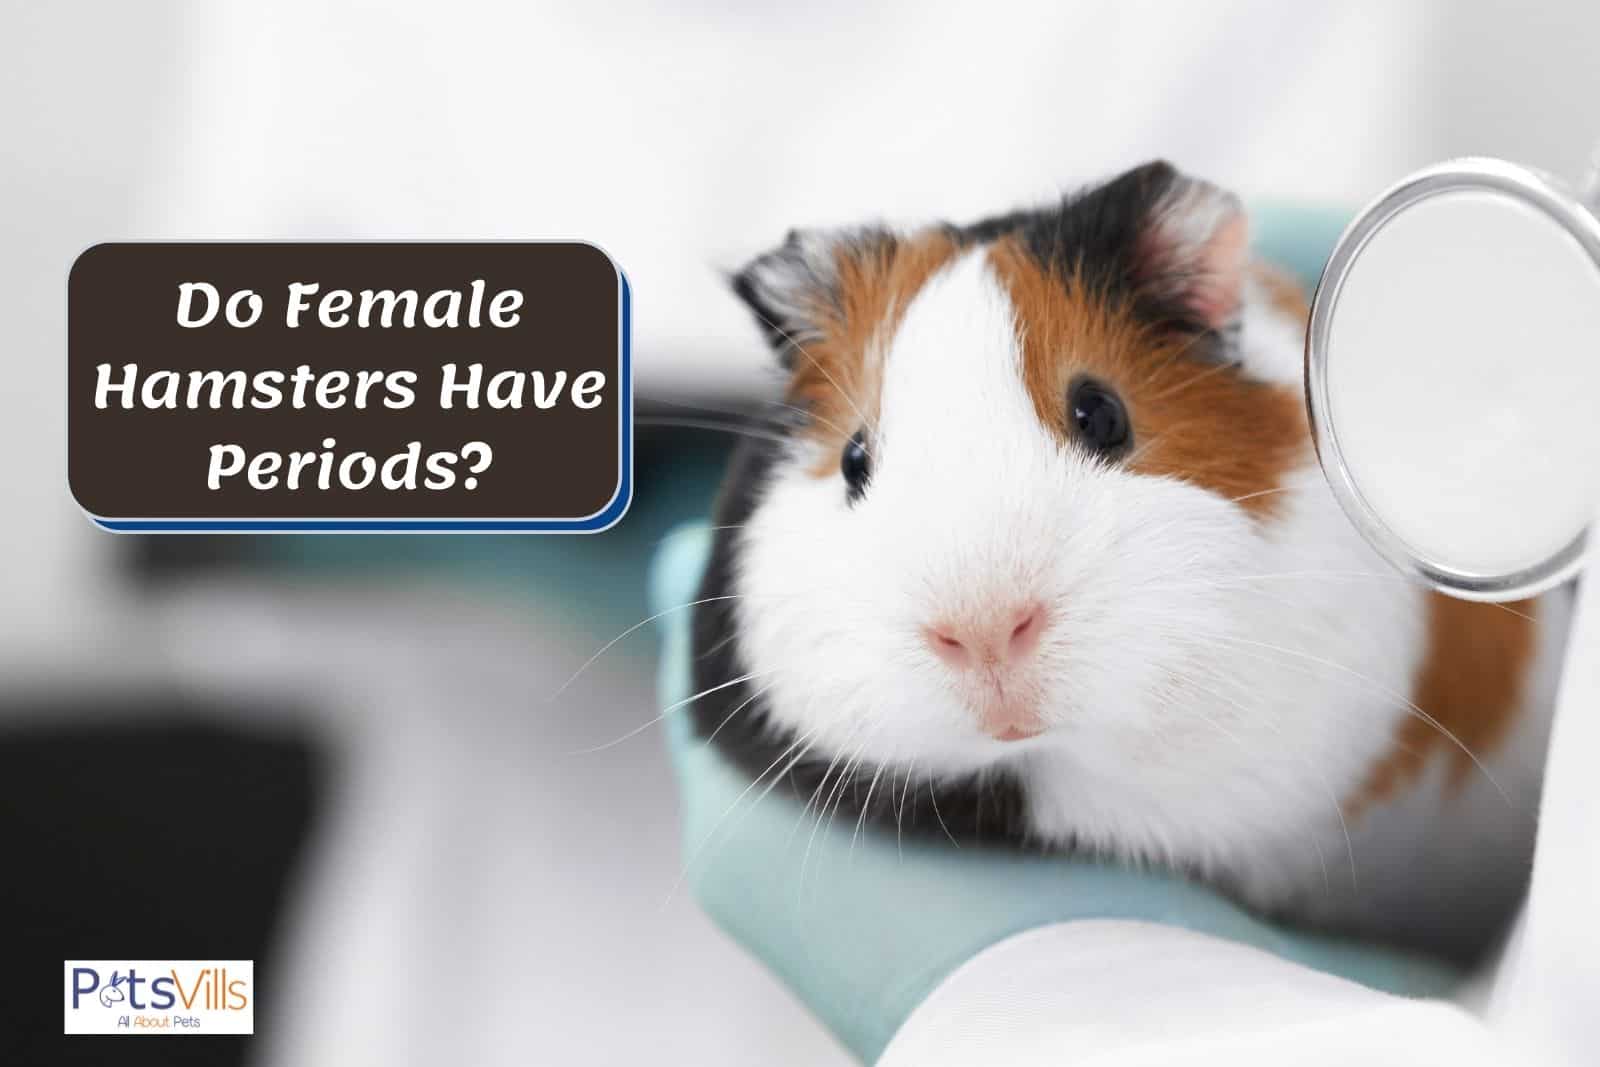 doctor checking the hamster but do female hamsters have periods?